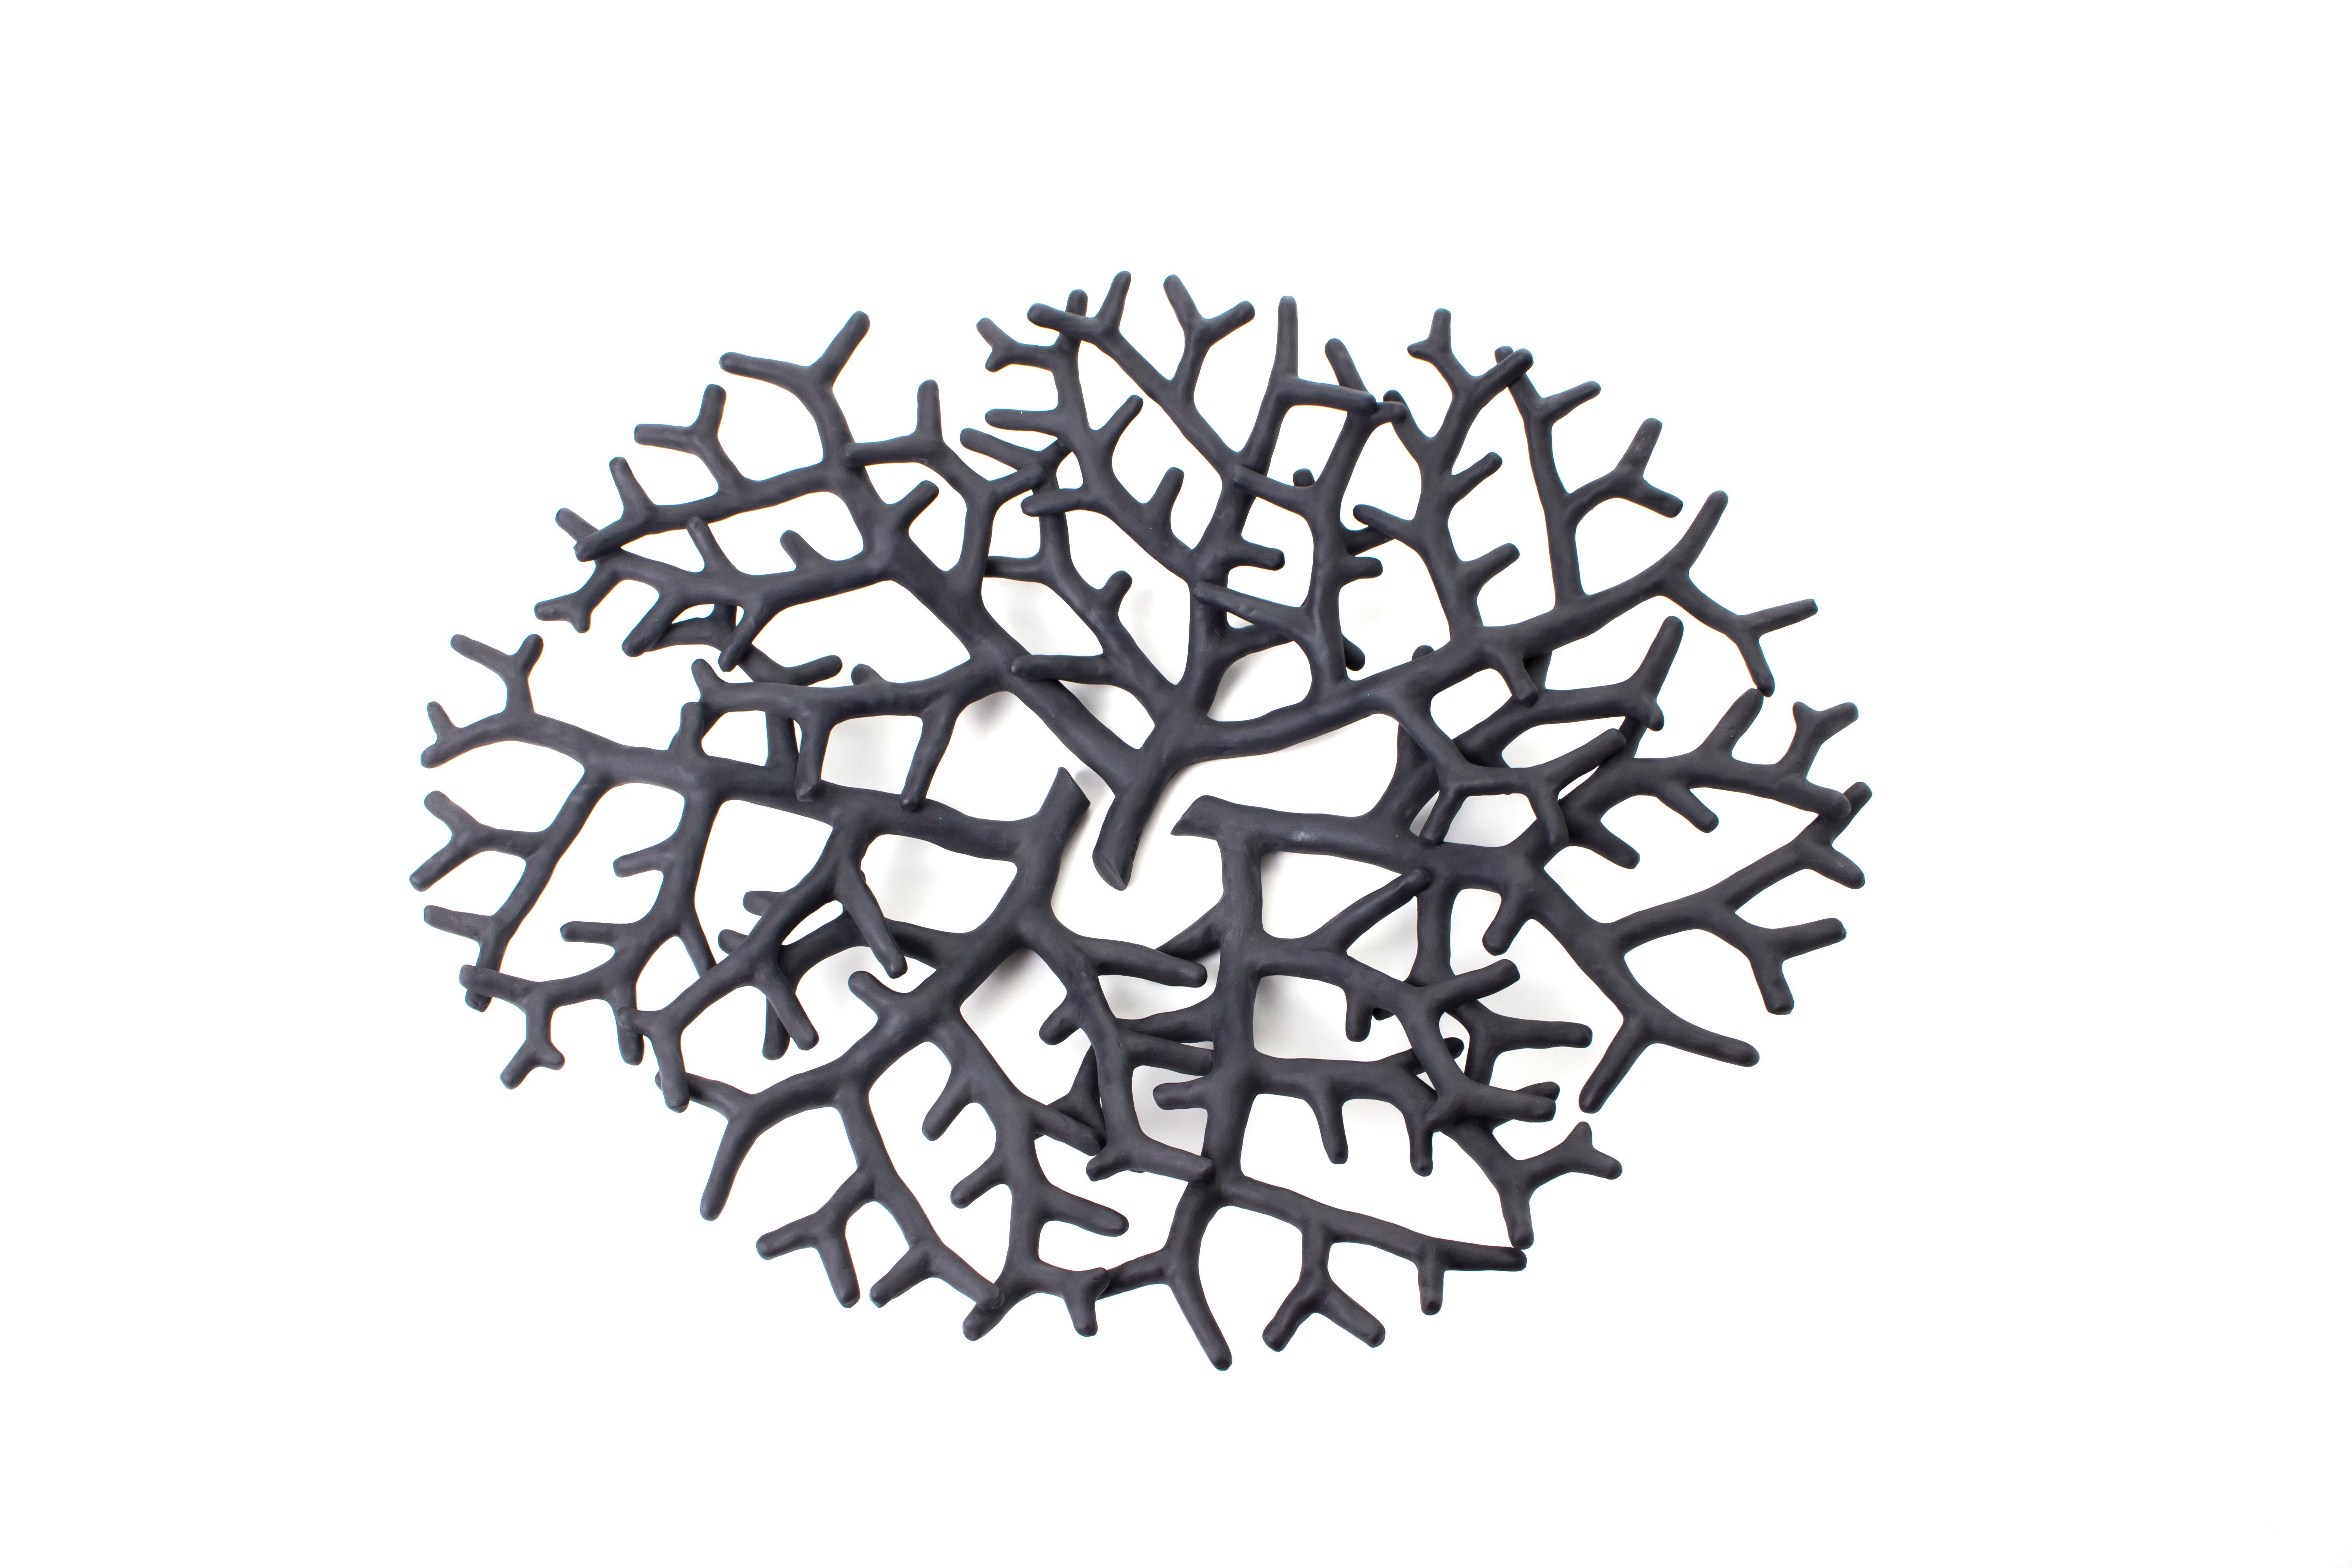 An underwater garden, populated by animals and plants from the Deep, is the main source of inspiration for this total black porcelain centerpiece. A sculpture, where shape triumphs over functionality, in a mesmerizing twist of corals. The matt black